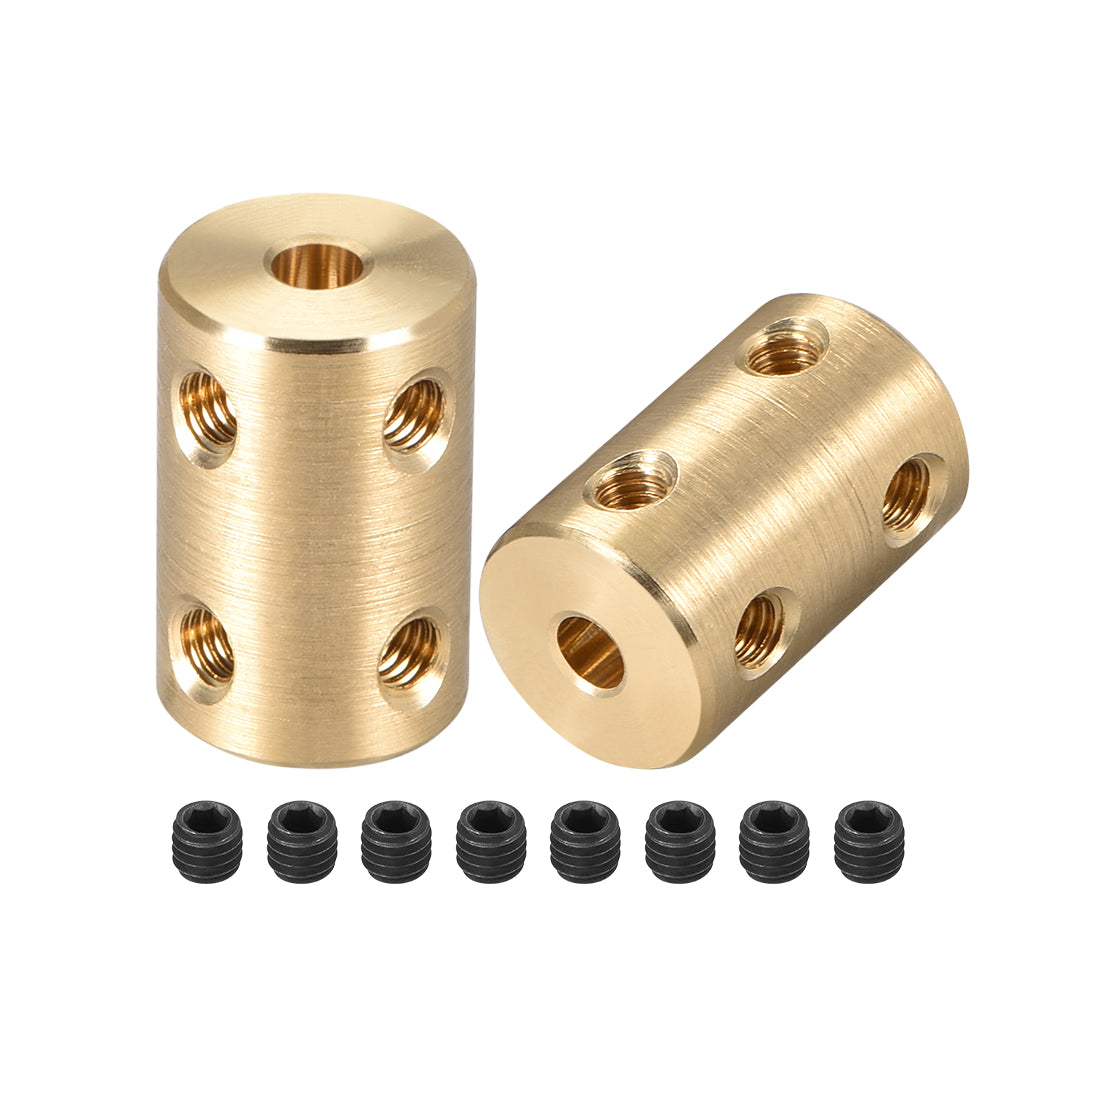 uxcell Uxcell Shaft Coupling 4mm to 4mm Bore L22xD14 Robot Motor Wheel Rigid Coupler Connector Gold Tone 2 Pcs